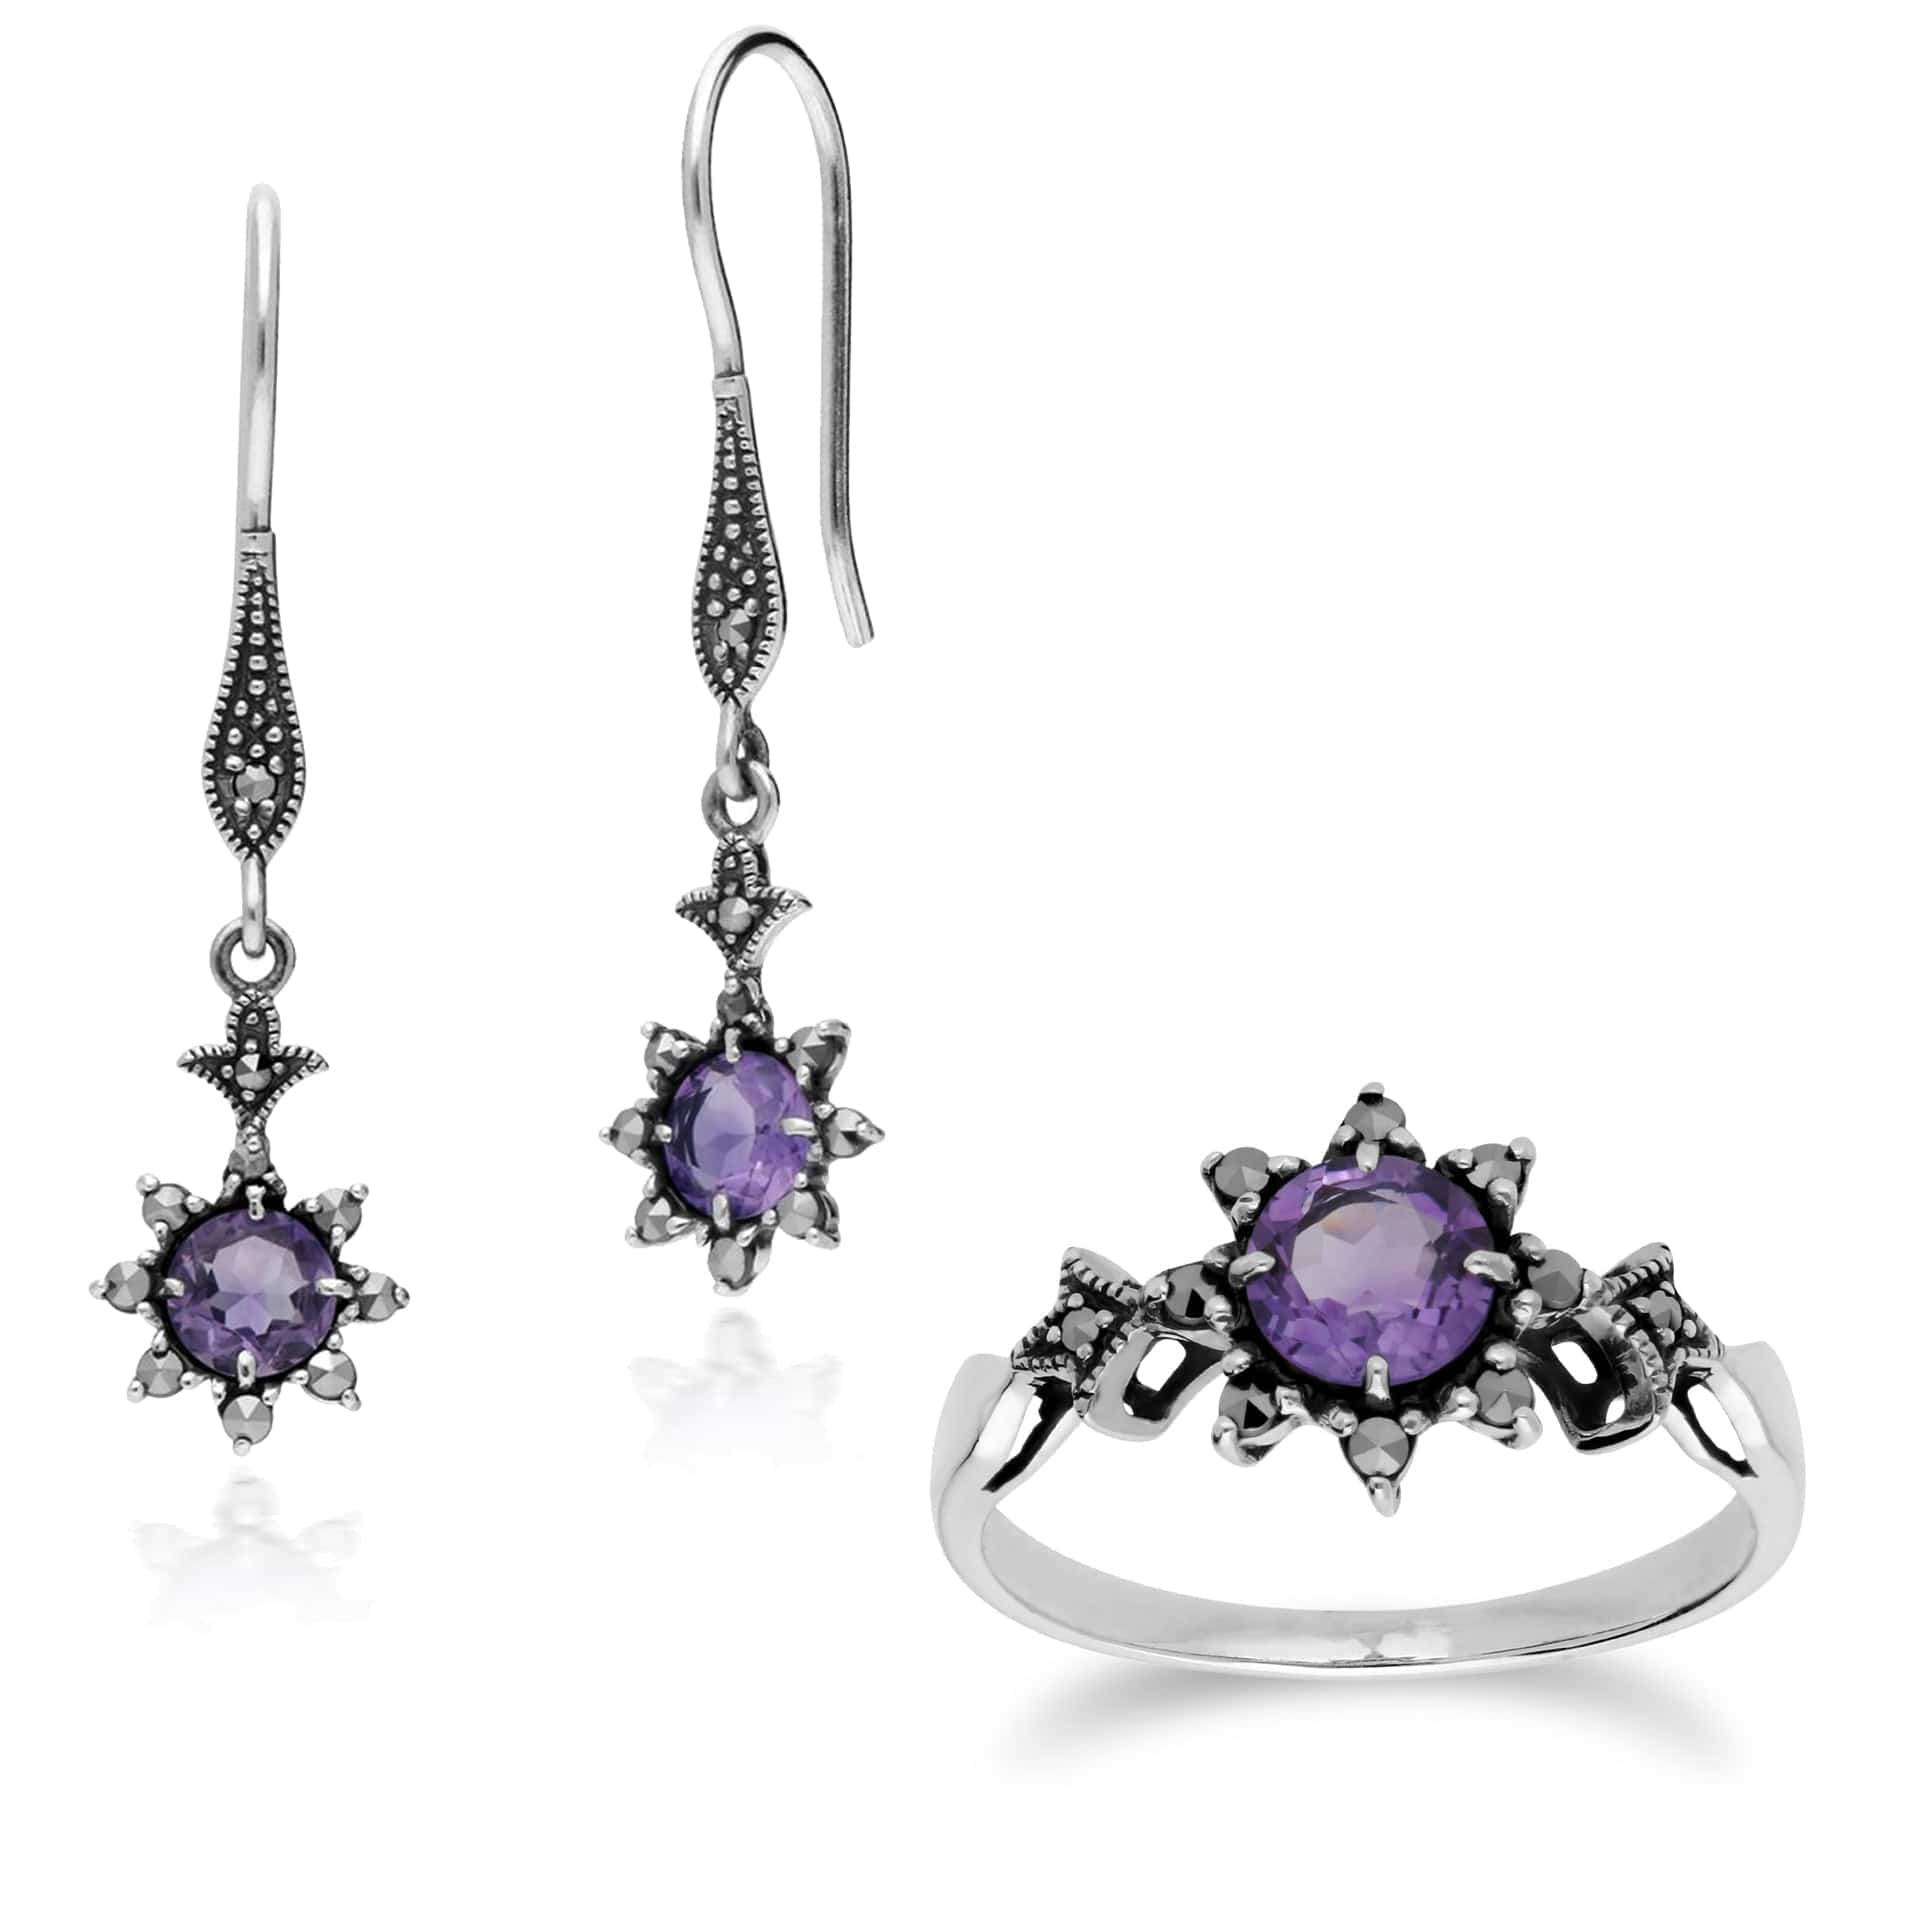 214E860602925-214R599502925 Art Nouveau Style Style Round Amethyst & Marcasite Starburst Drop Earrings & Ring Set in 925 Sterling Silver 1